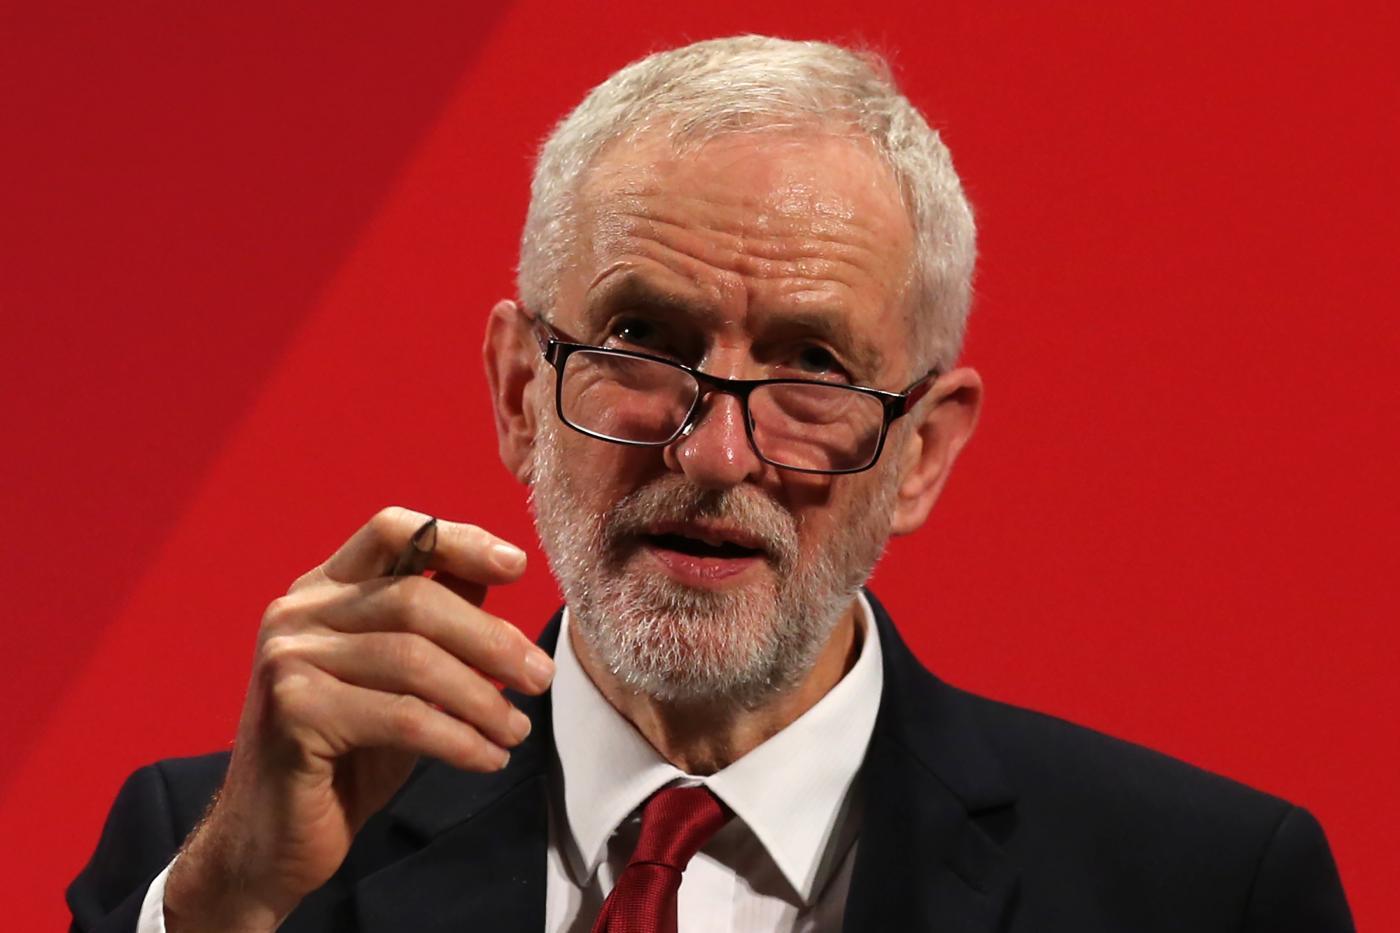 Jeremy Corbyn, former leader of the Labour Party, stepped down after the 2019 general election defeat